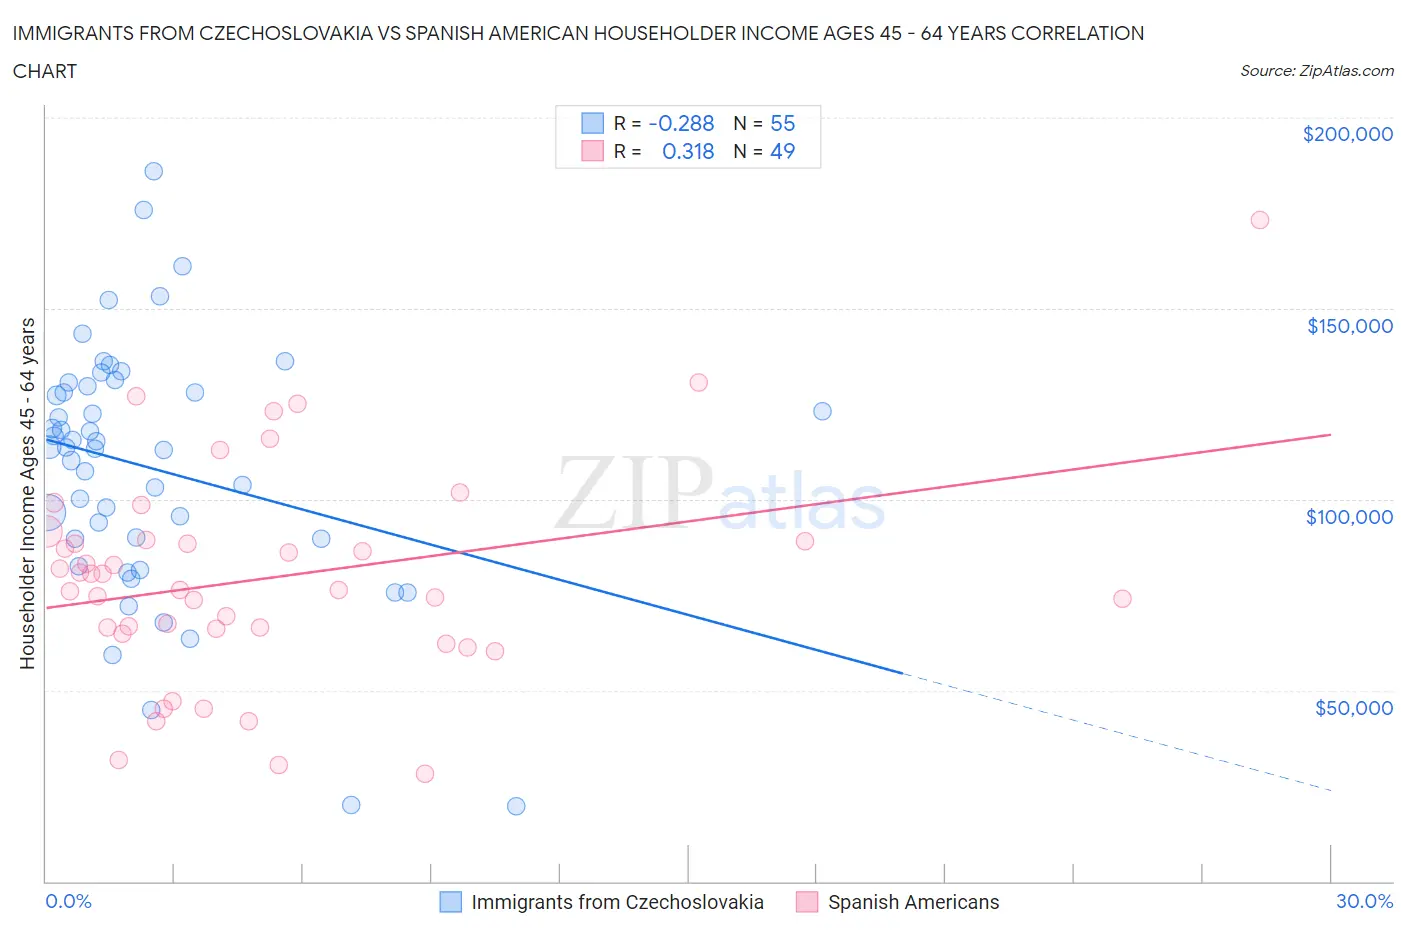 Immigrants from Czechoslovakia vs Spanish American Householder Income Ages 45 - 64 years